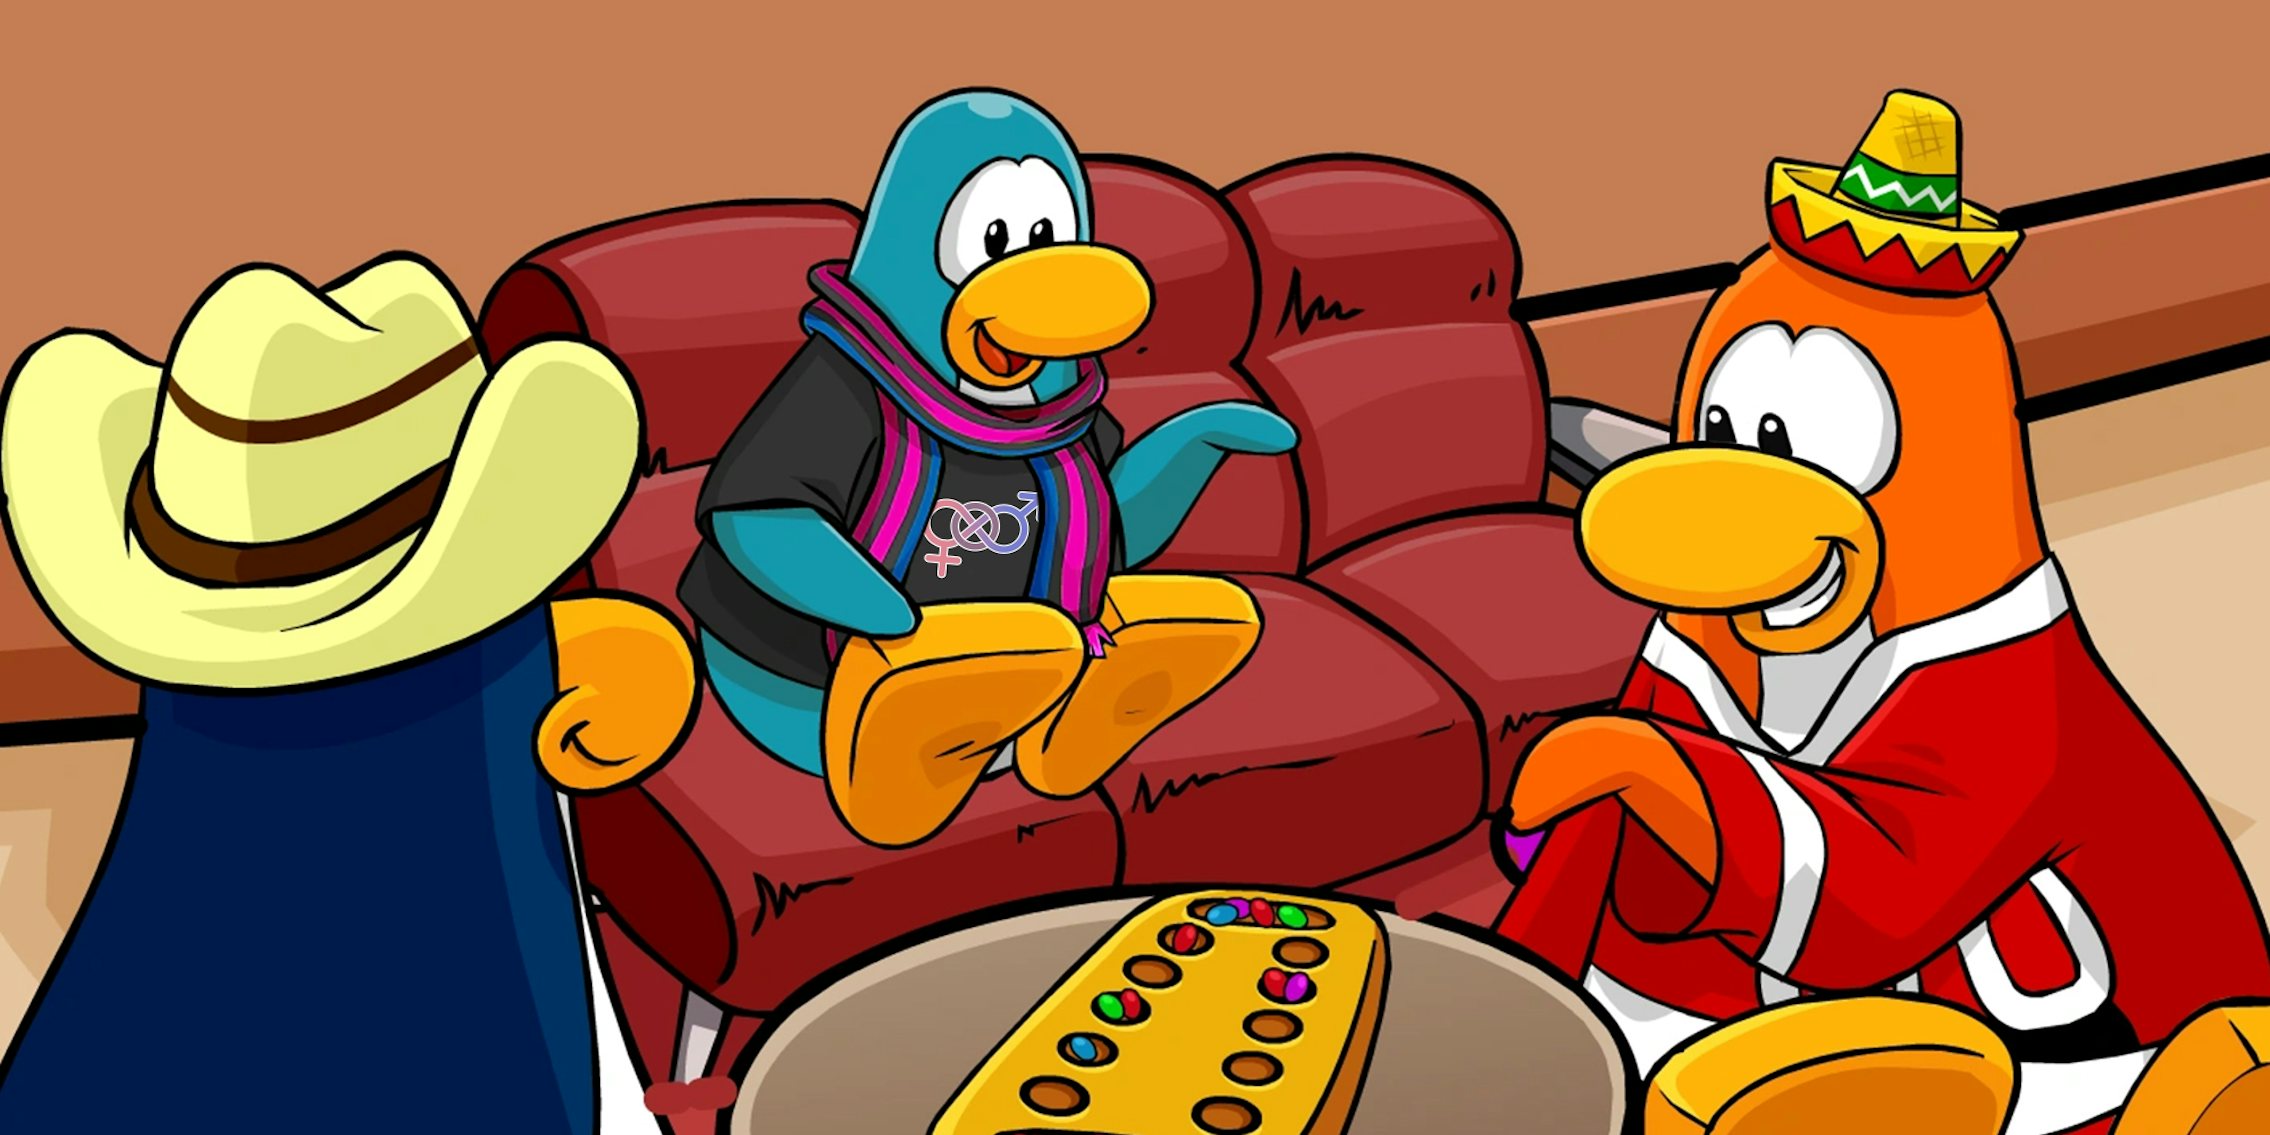 Club Penguin in 2020!?. This week, I decided to play the game